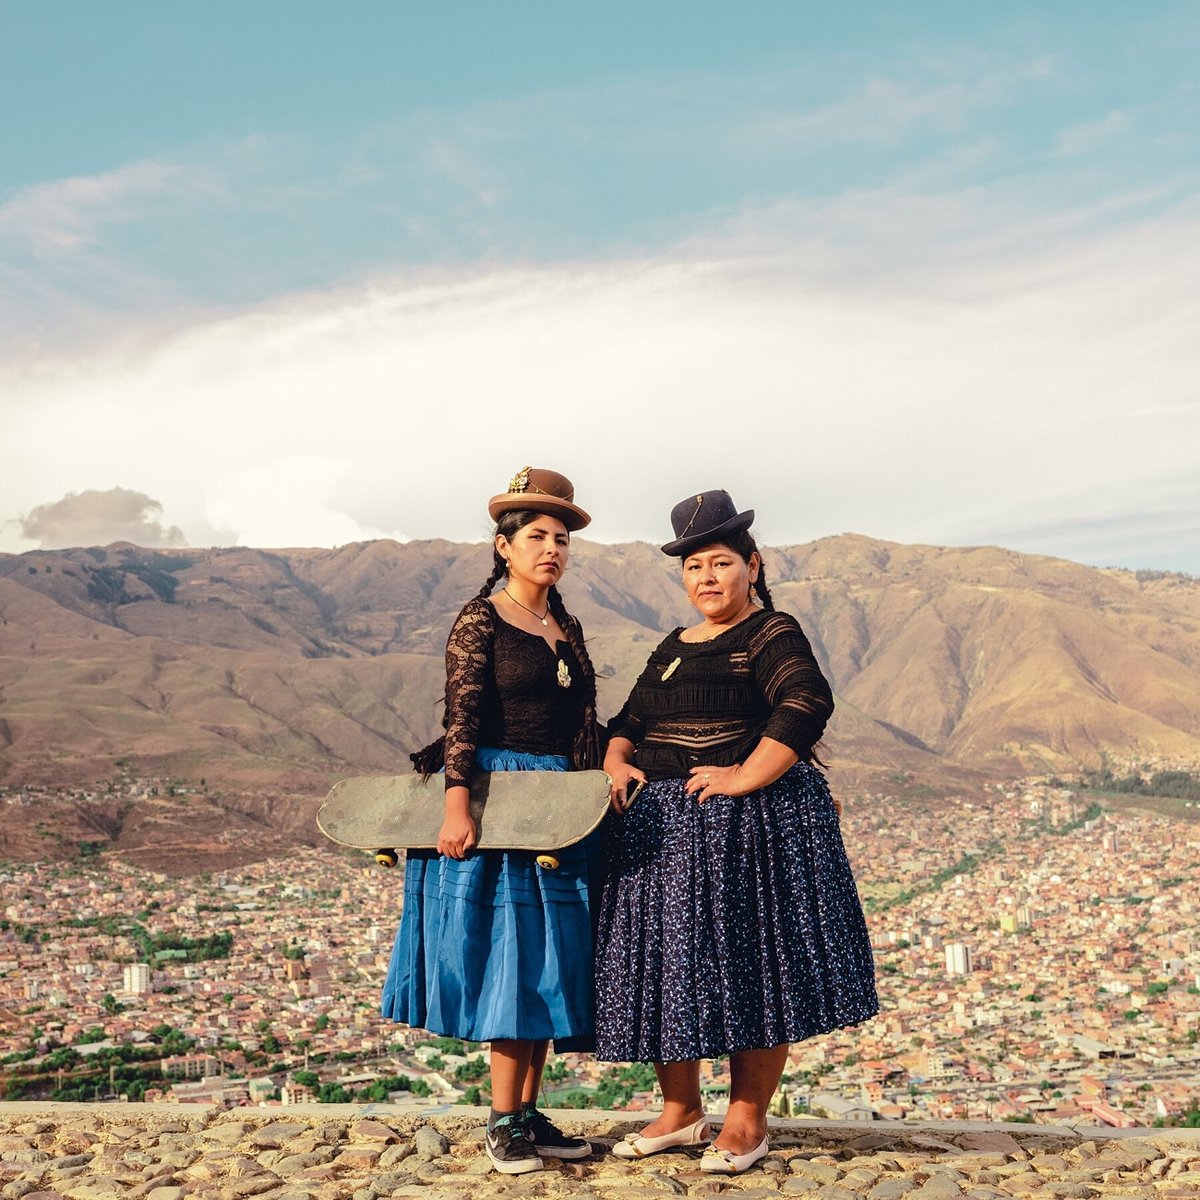 women in traditional Bolivian dress pose with a skatebaord